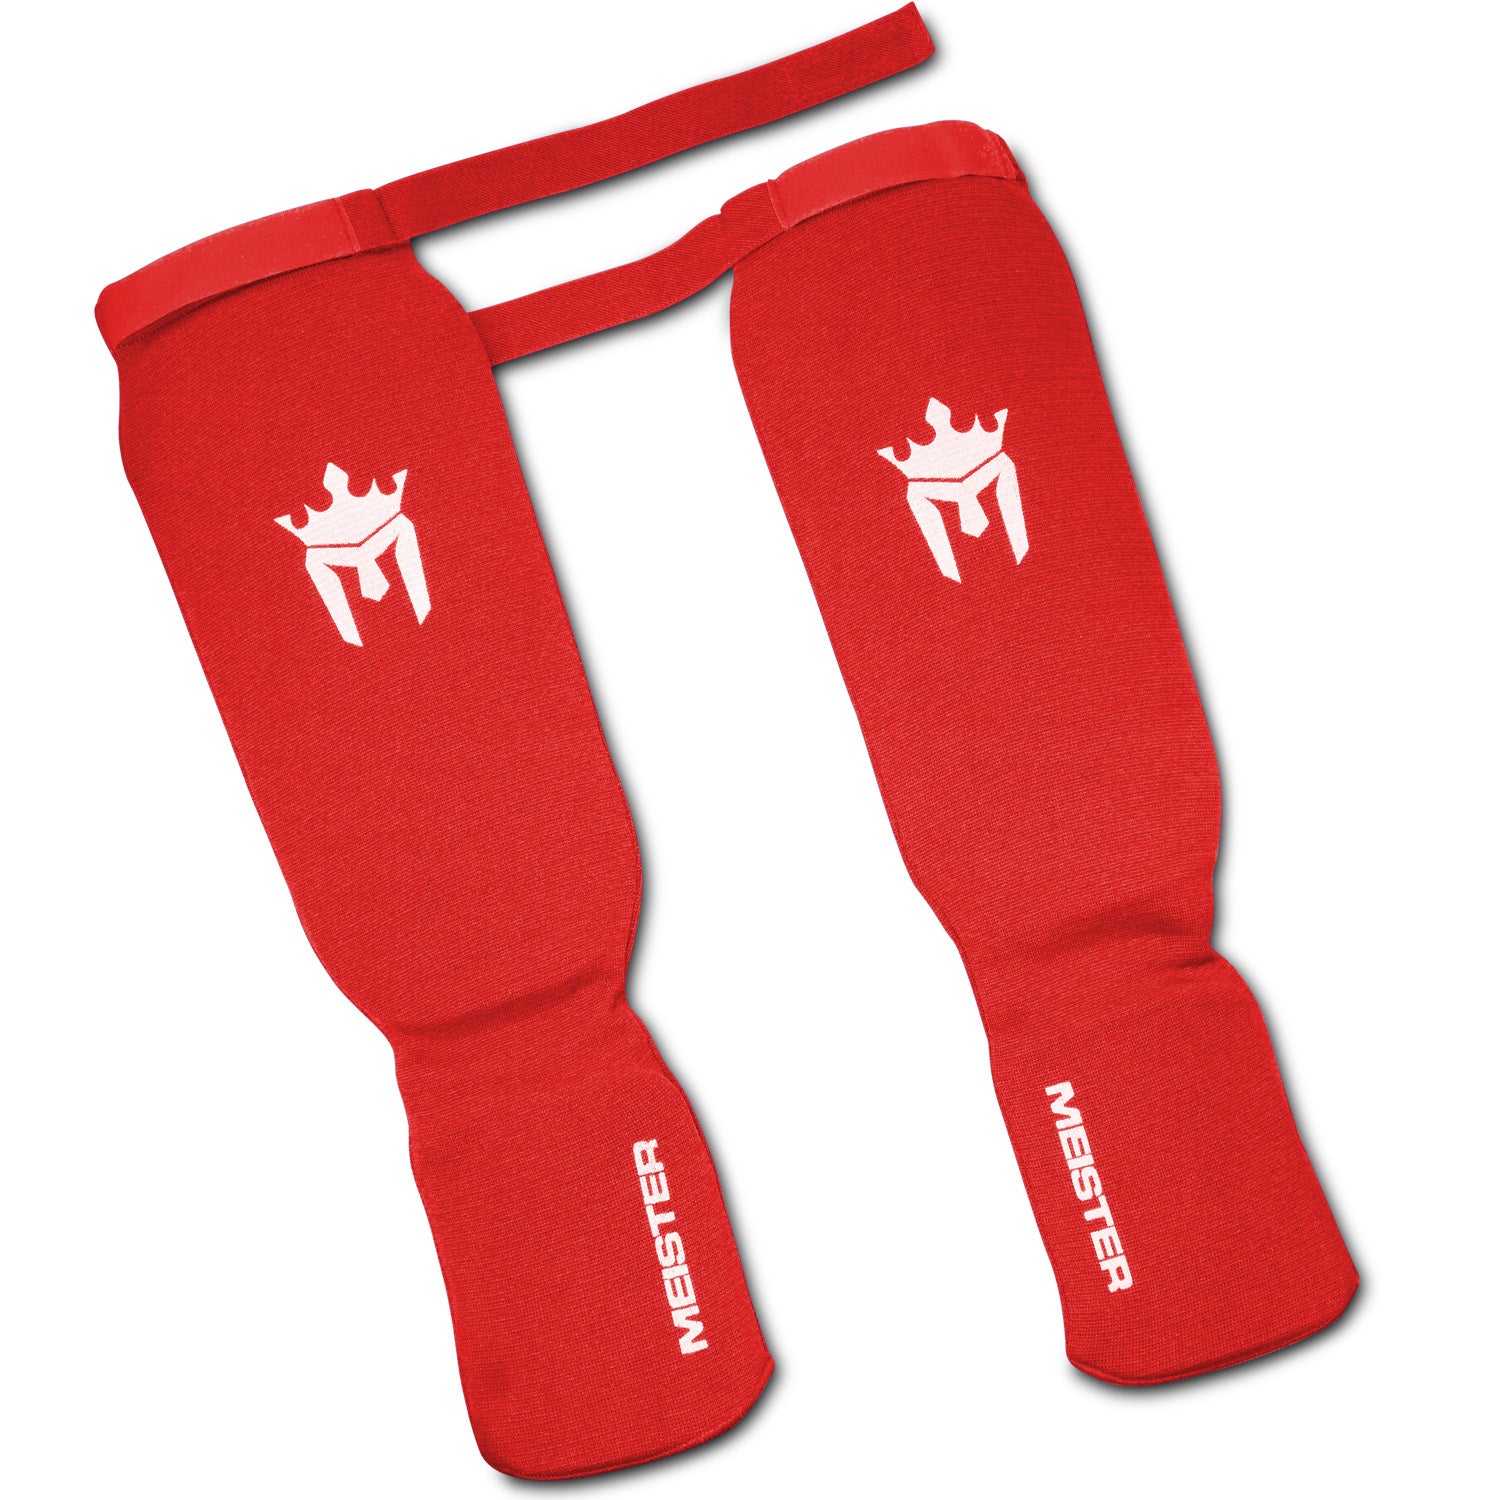 Meister Elastic Cloth Shin & Instep Padded Guards (Pair) - Red